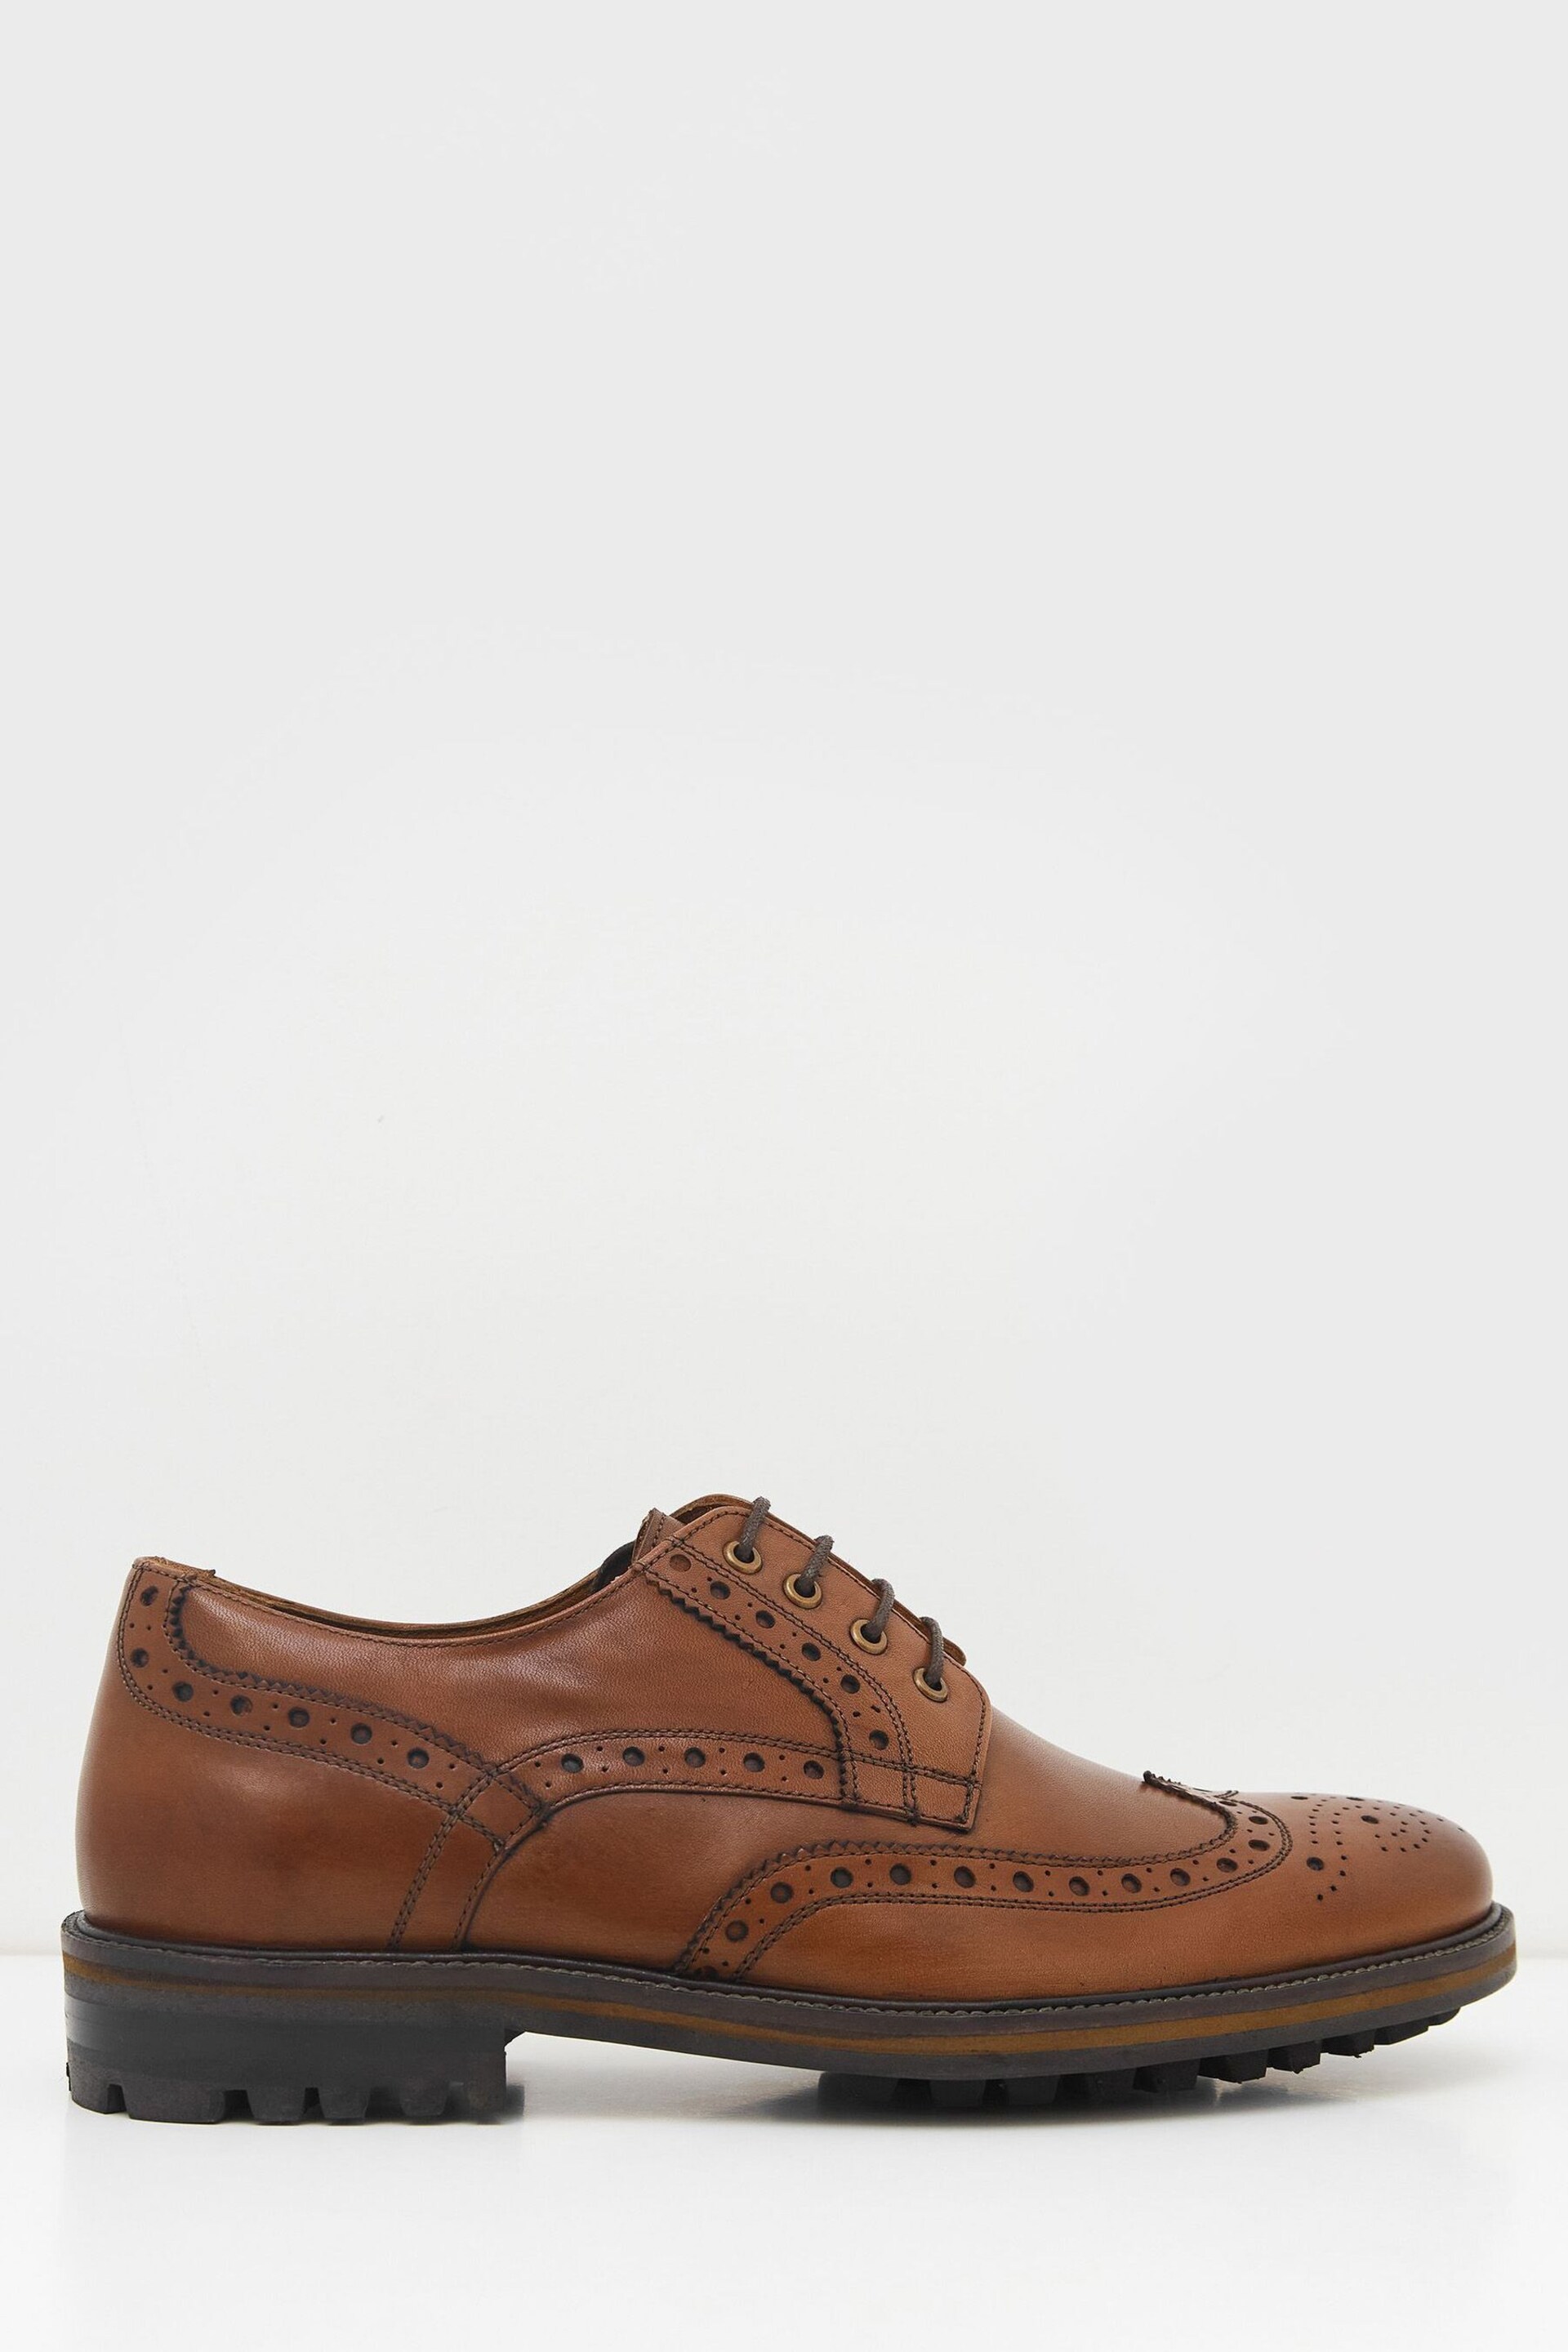 White Stuff Natural Arlo Brogue Leather Shoes - Image 1 of 4